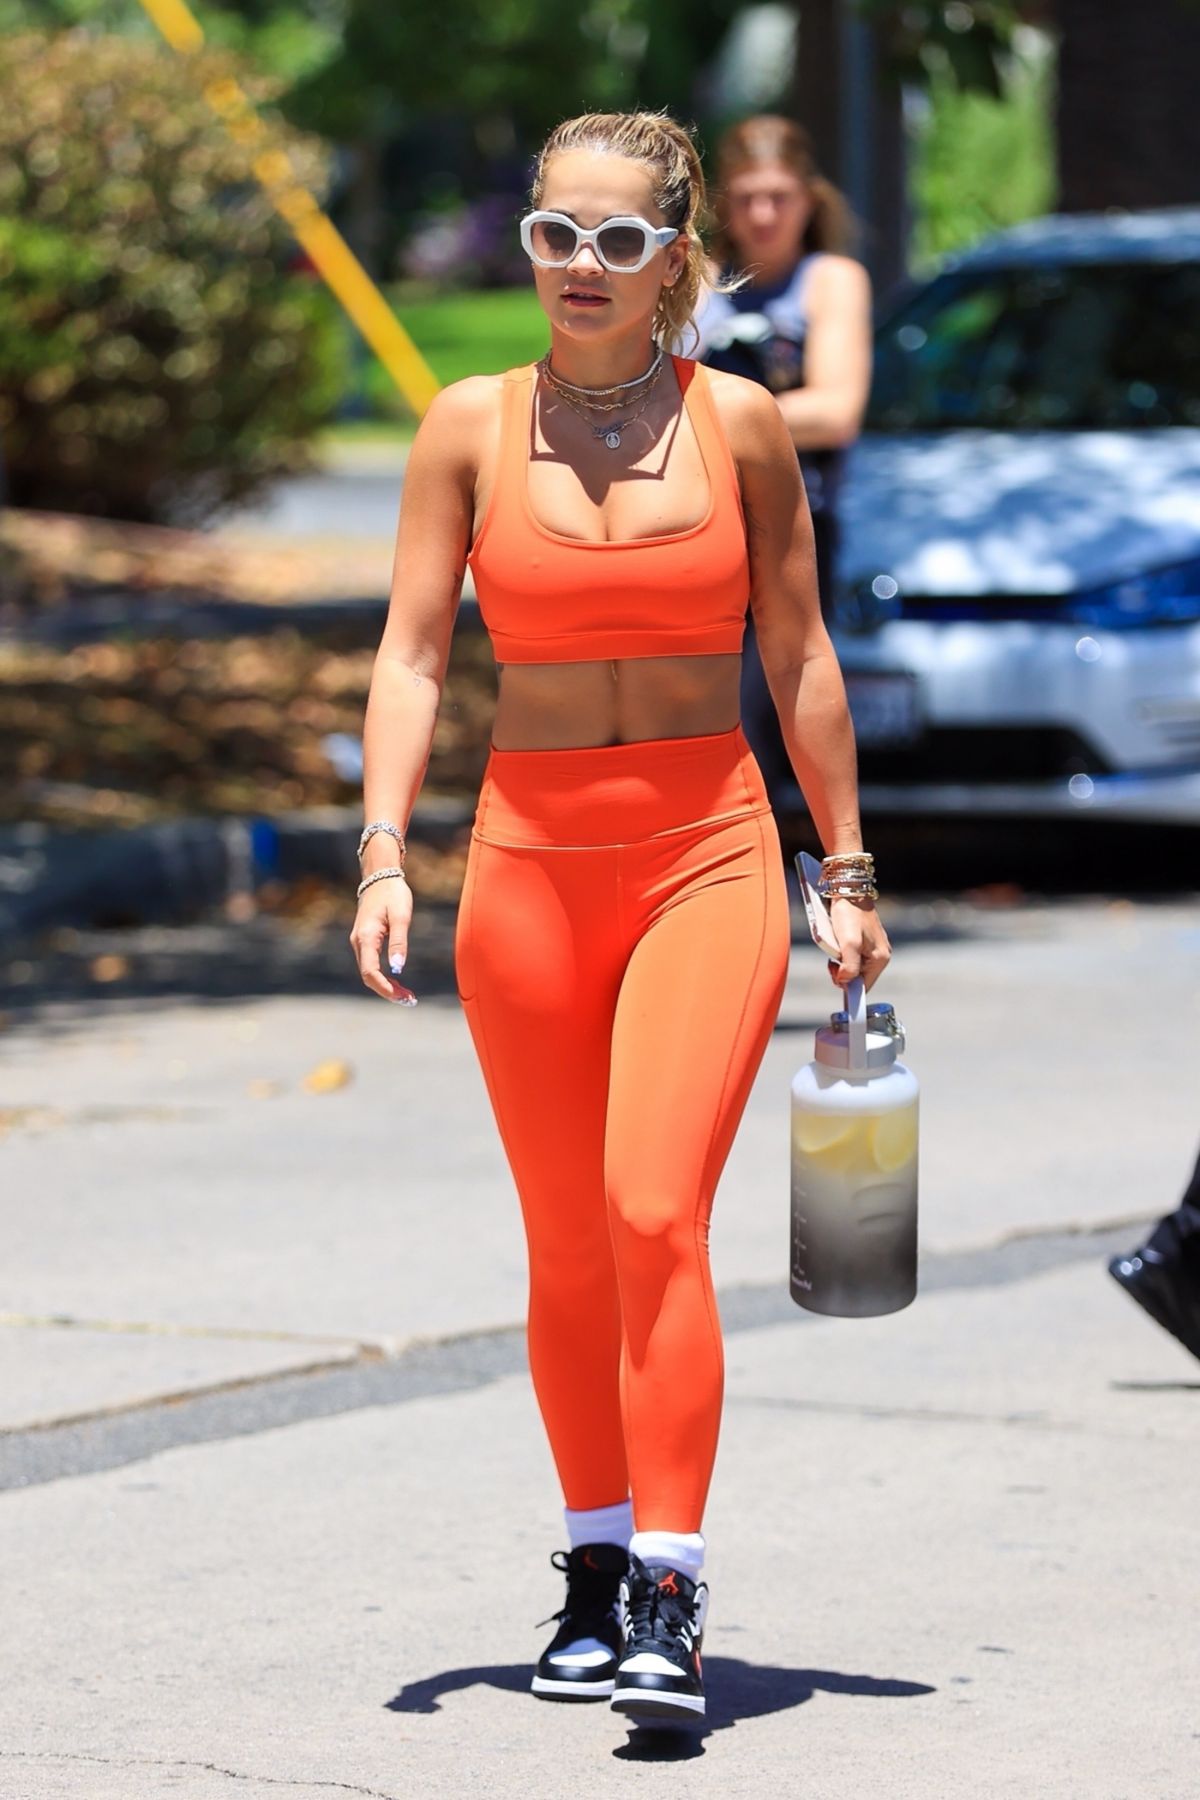 Rita Ora flaunts her midriff in a sports bra and leggings heading to Pilates Class in Los Angeles